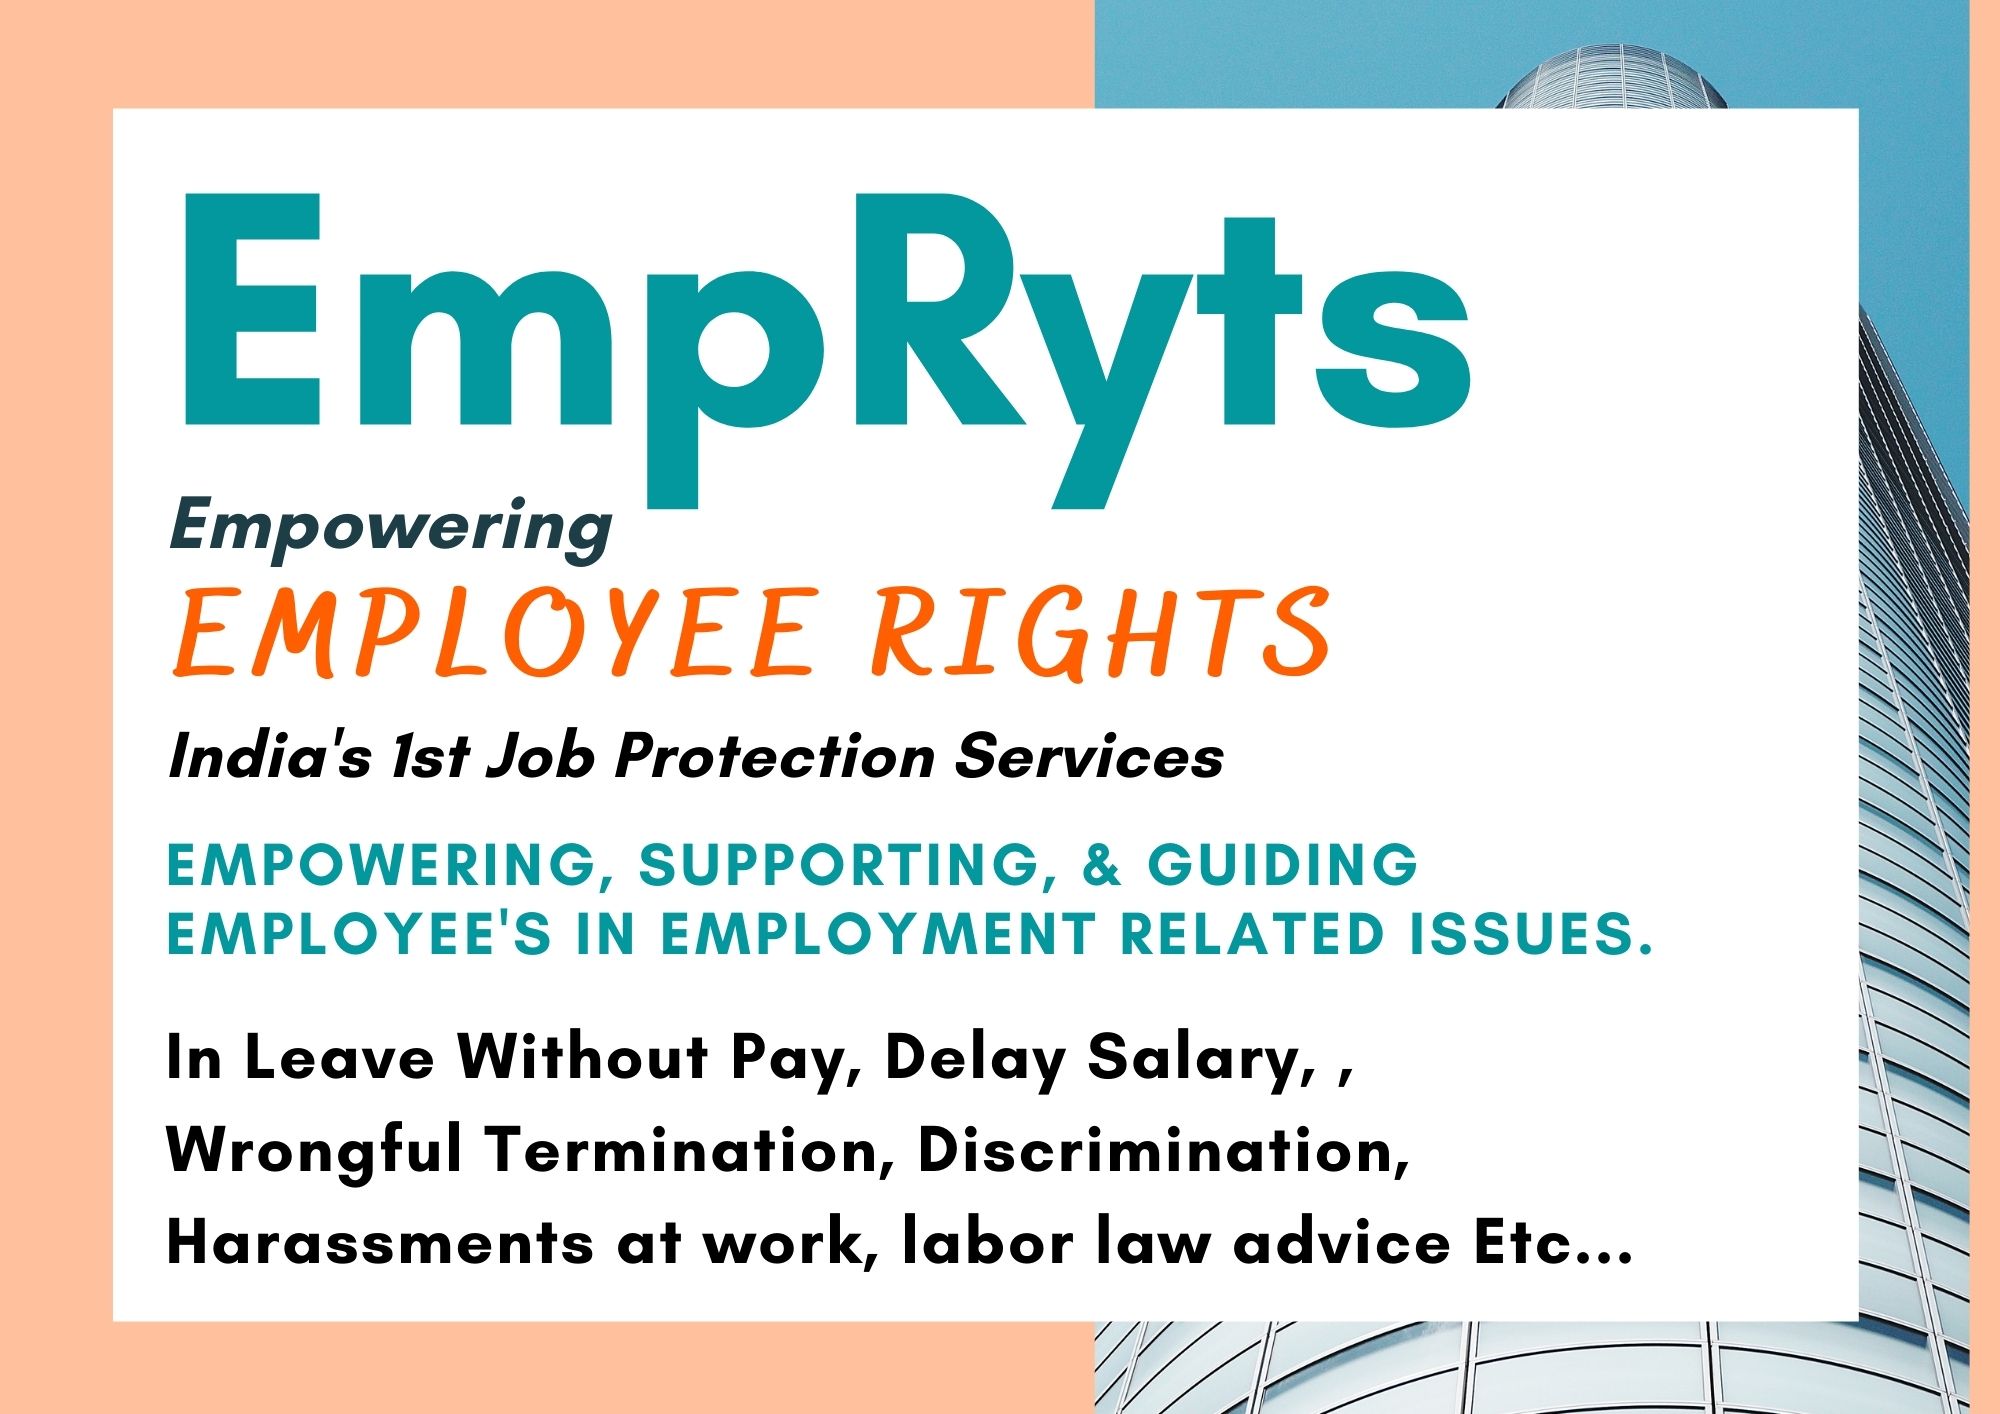 (c) Employeerights.co.in